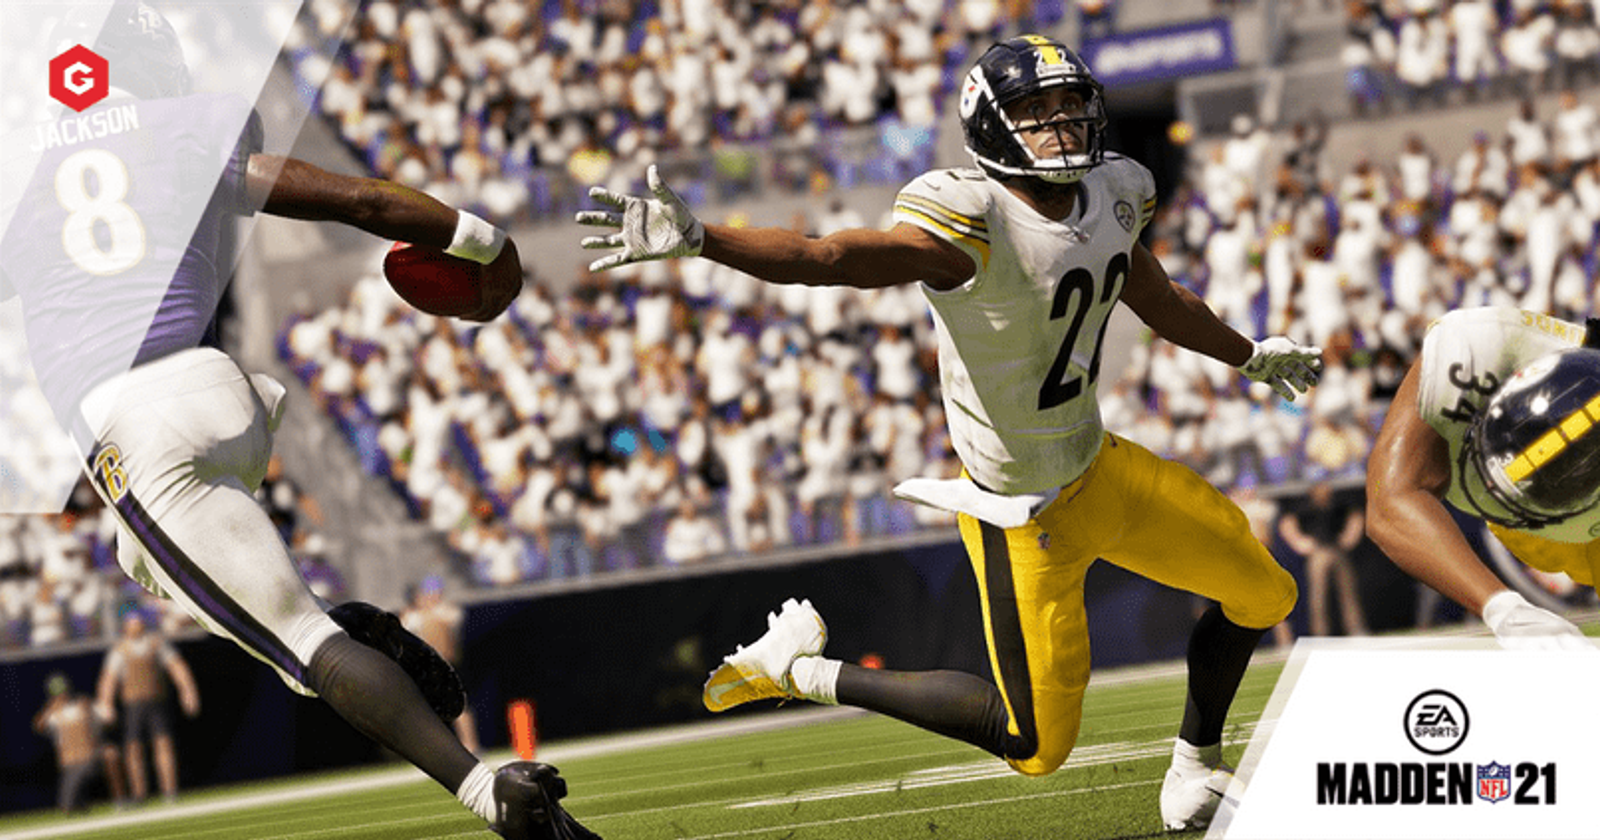 Madden 21 Upgrade Guide - How to Upgrade to PS5 or Xbox Series X